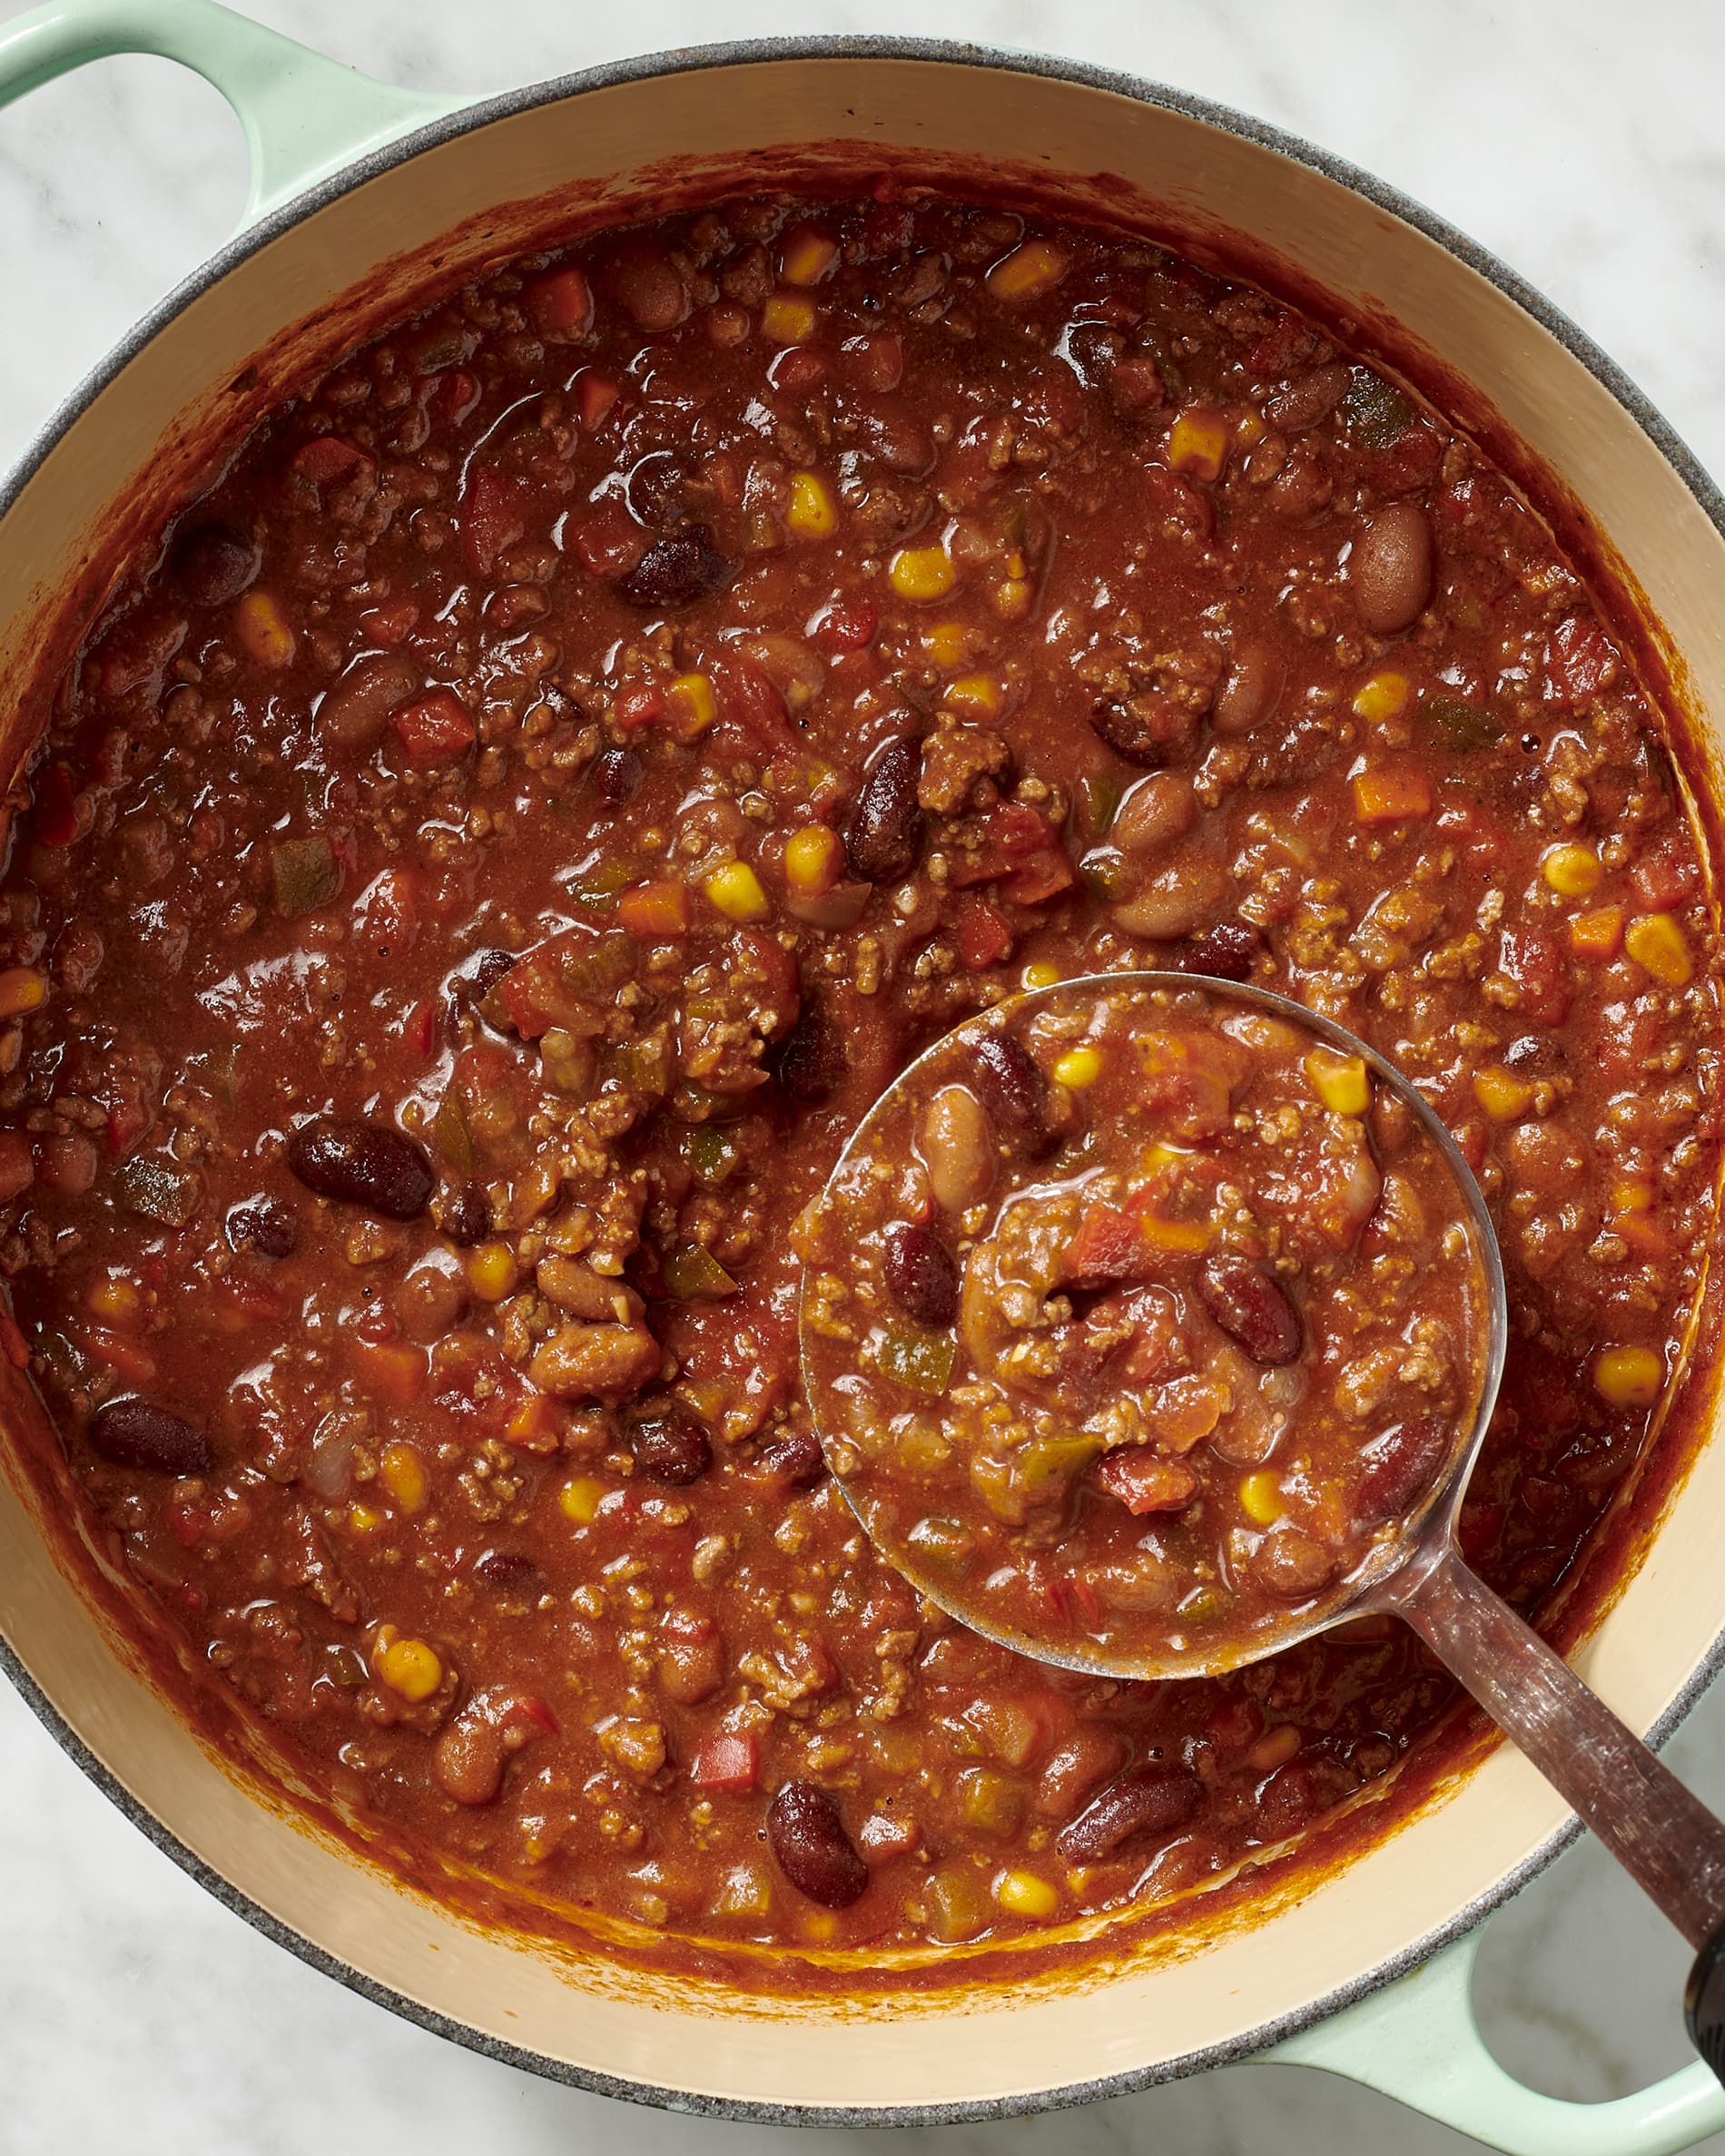 How To Make Very Good Chili Any Way You Like It